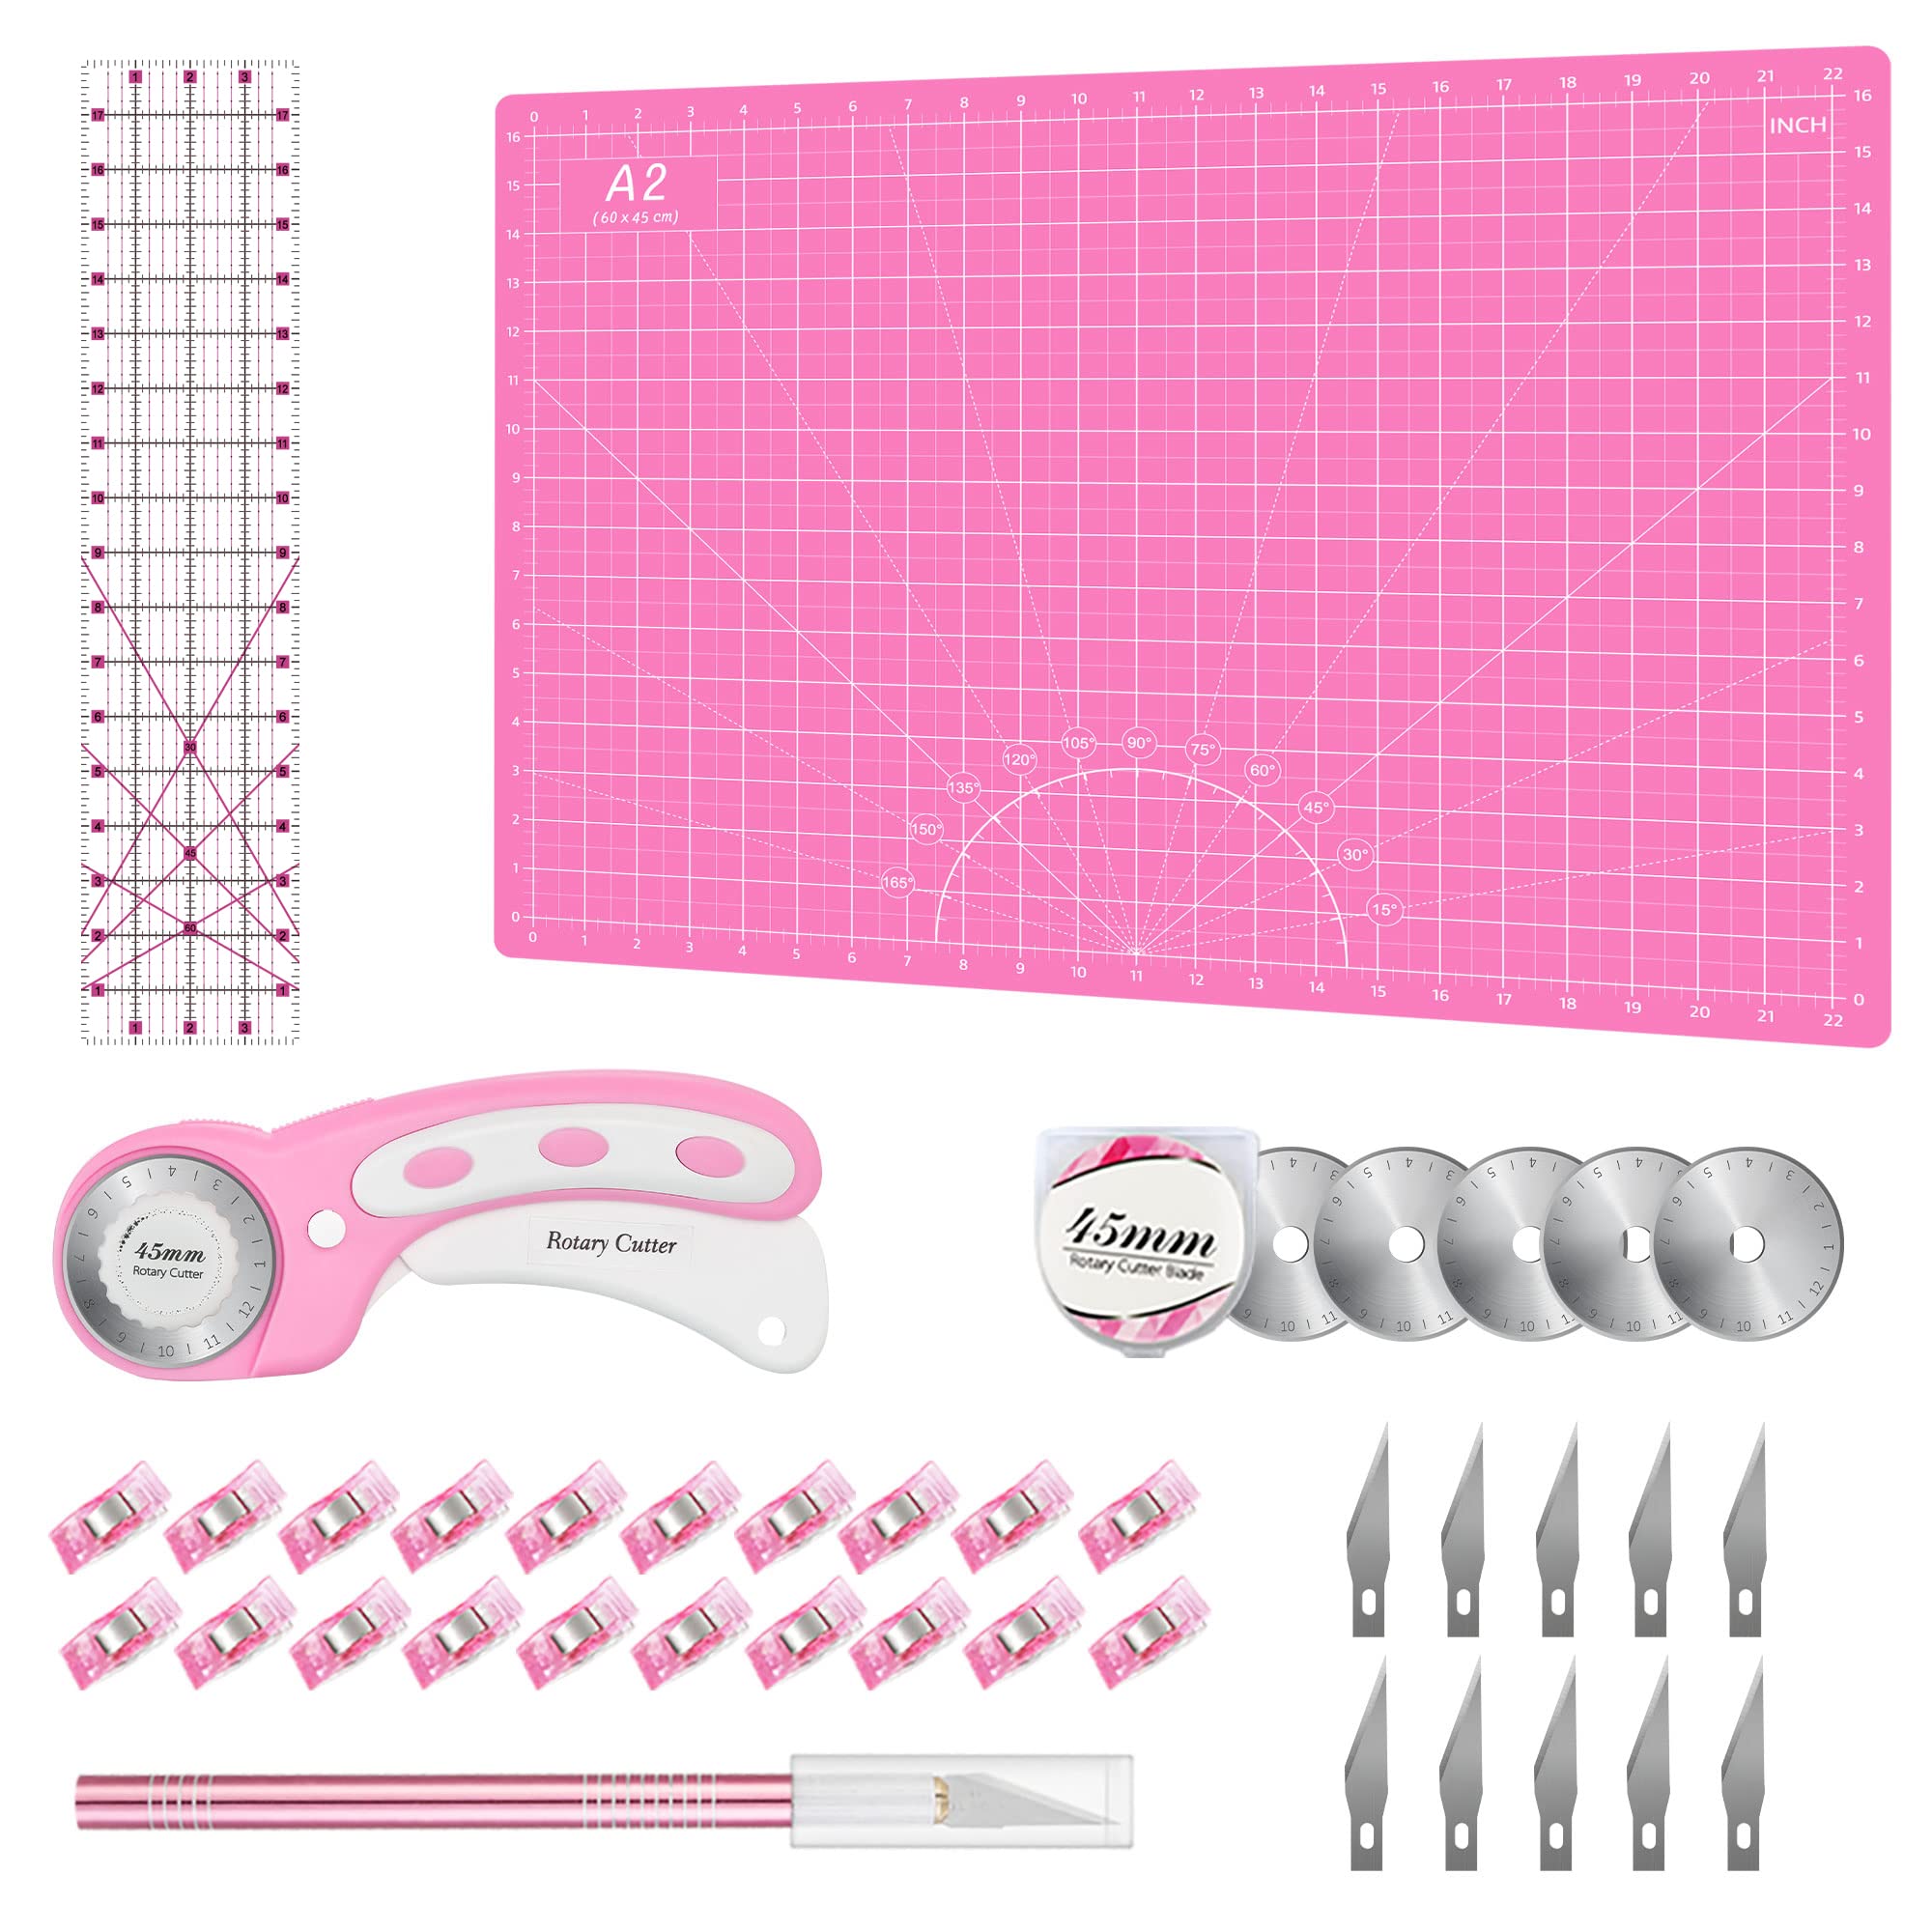 Headley Tools Rotary Cutter Set Pink - Quilting Kit incl. 45mm Fabric  Cutter, 5 Replacement Blades, A2 Cutting Mat, Acrylic Quilting Ruler and